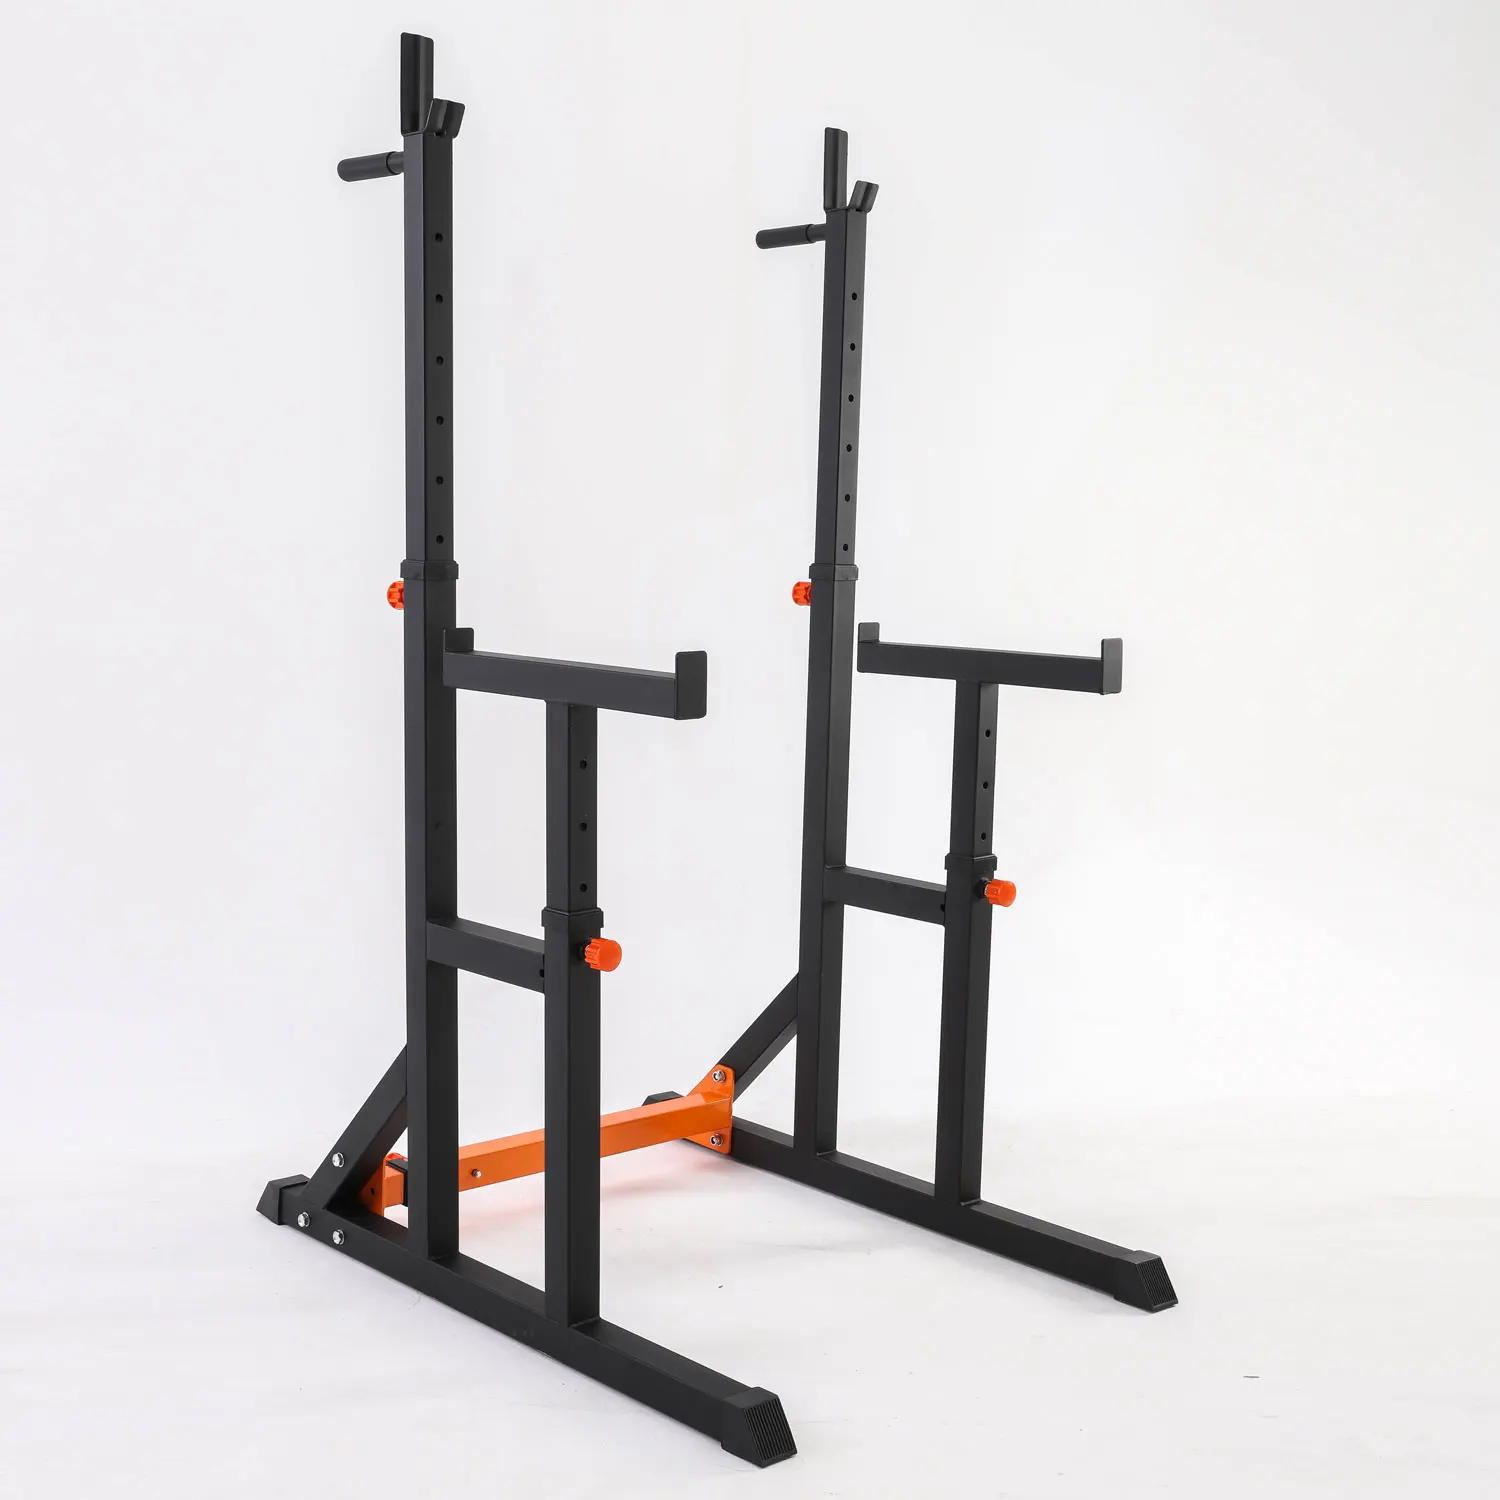 Details about   Adjustable Squat Rack Stands Multifunction Barbell Bench Press Dipping Station ☆ 